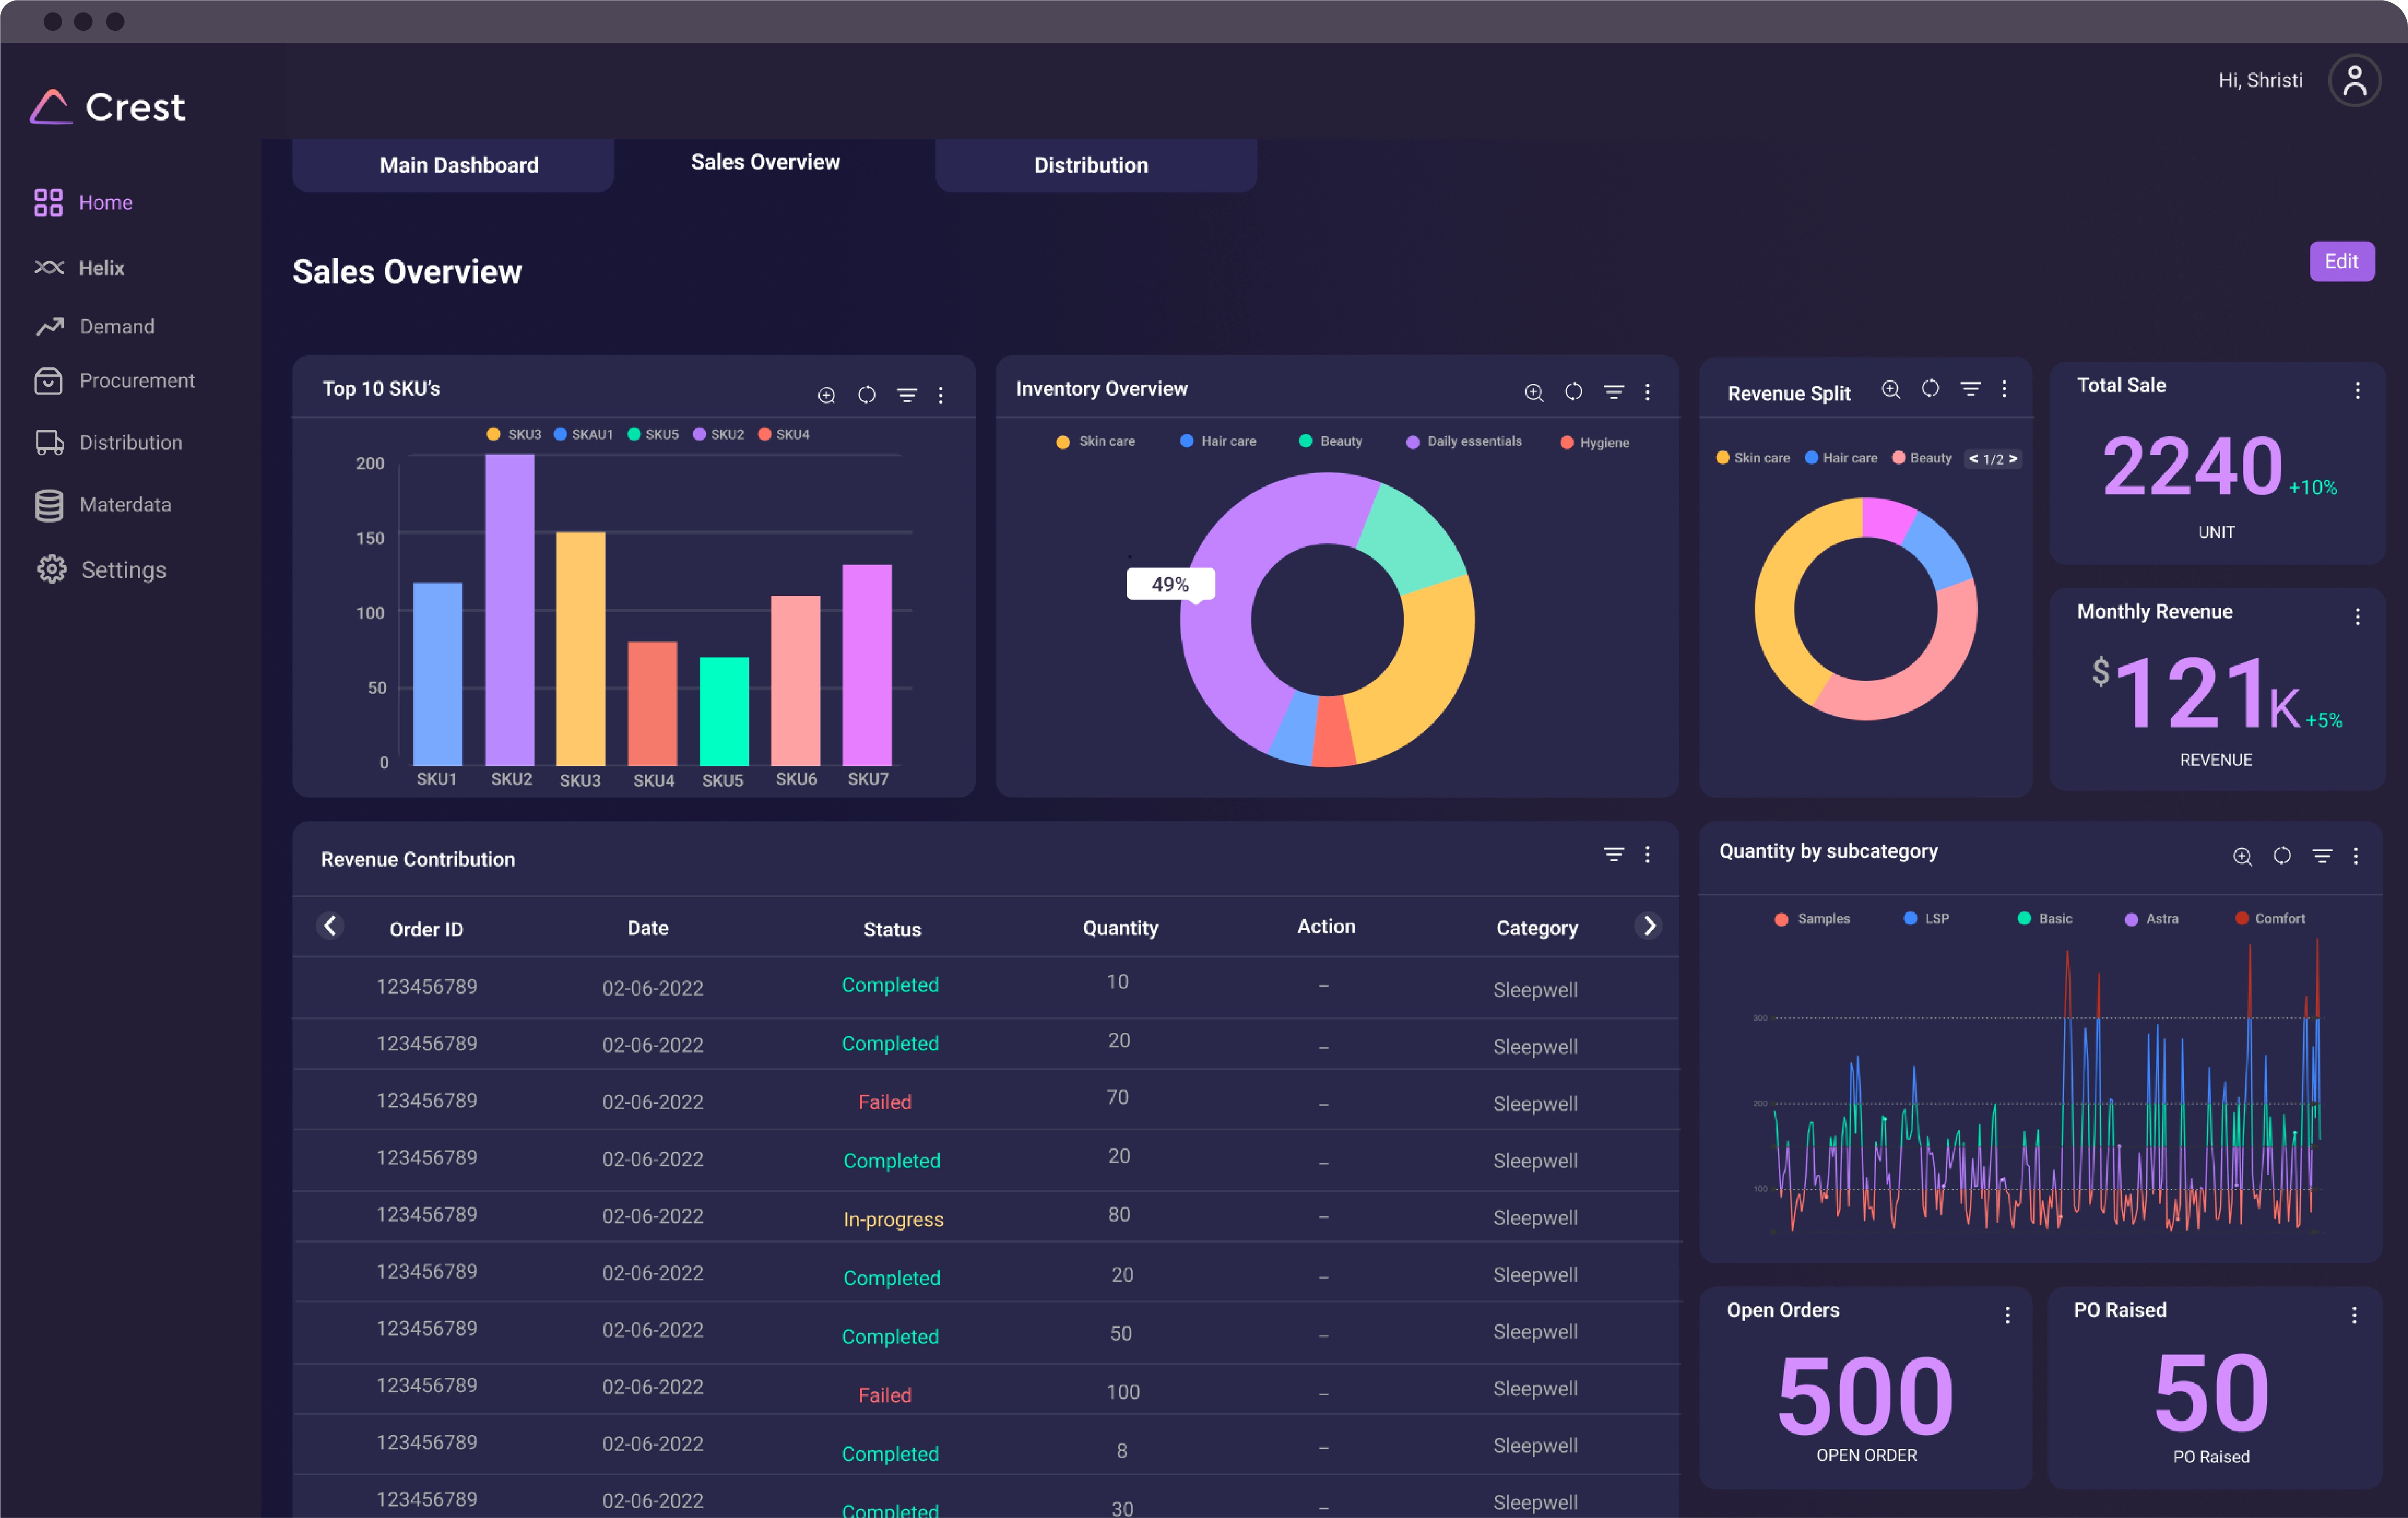 Custom Dashboards - Unlock your data's full potential with customised dashboards designed to easily identify trends, patterns, and insights that matter, while empowering your team to extract valuable information in a clear and concise format.